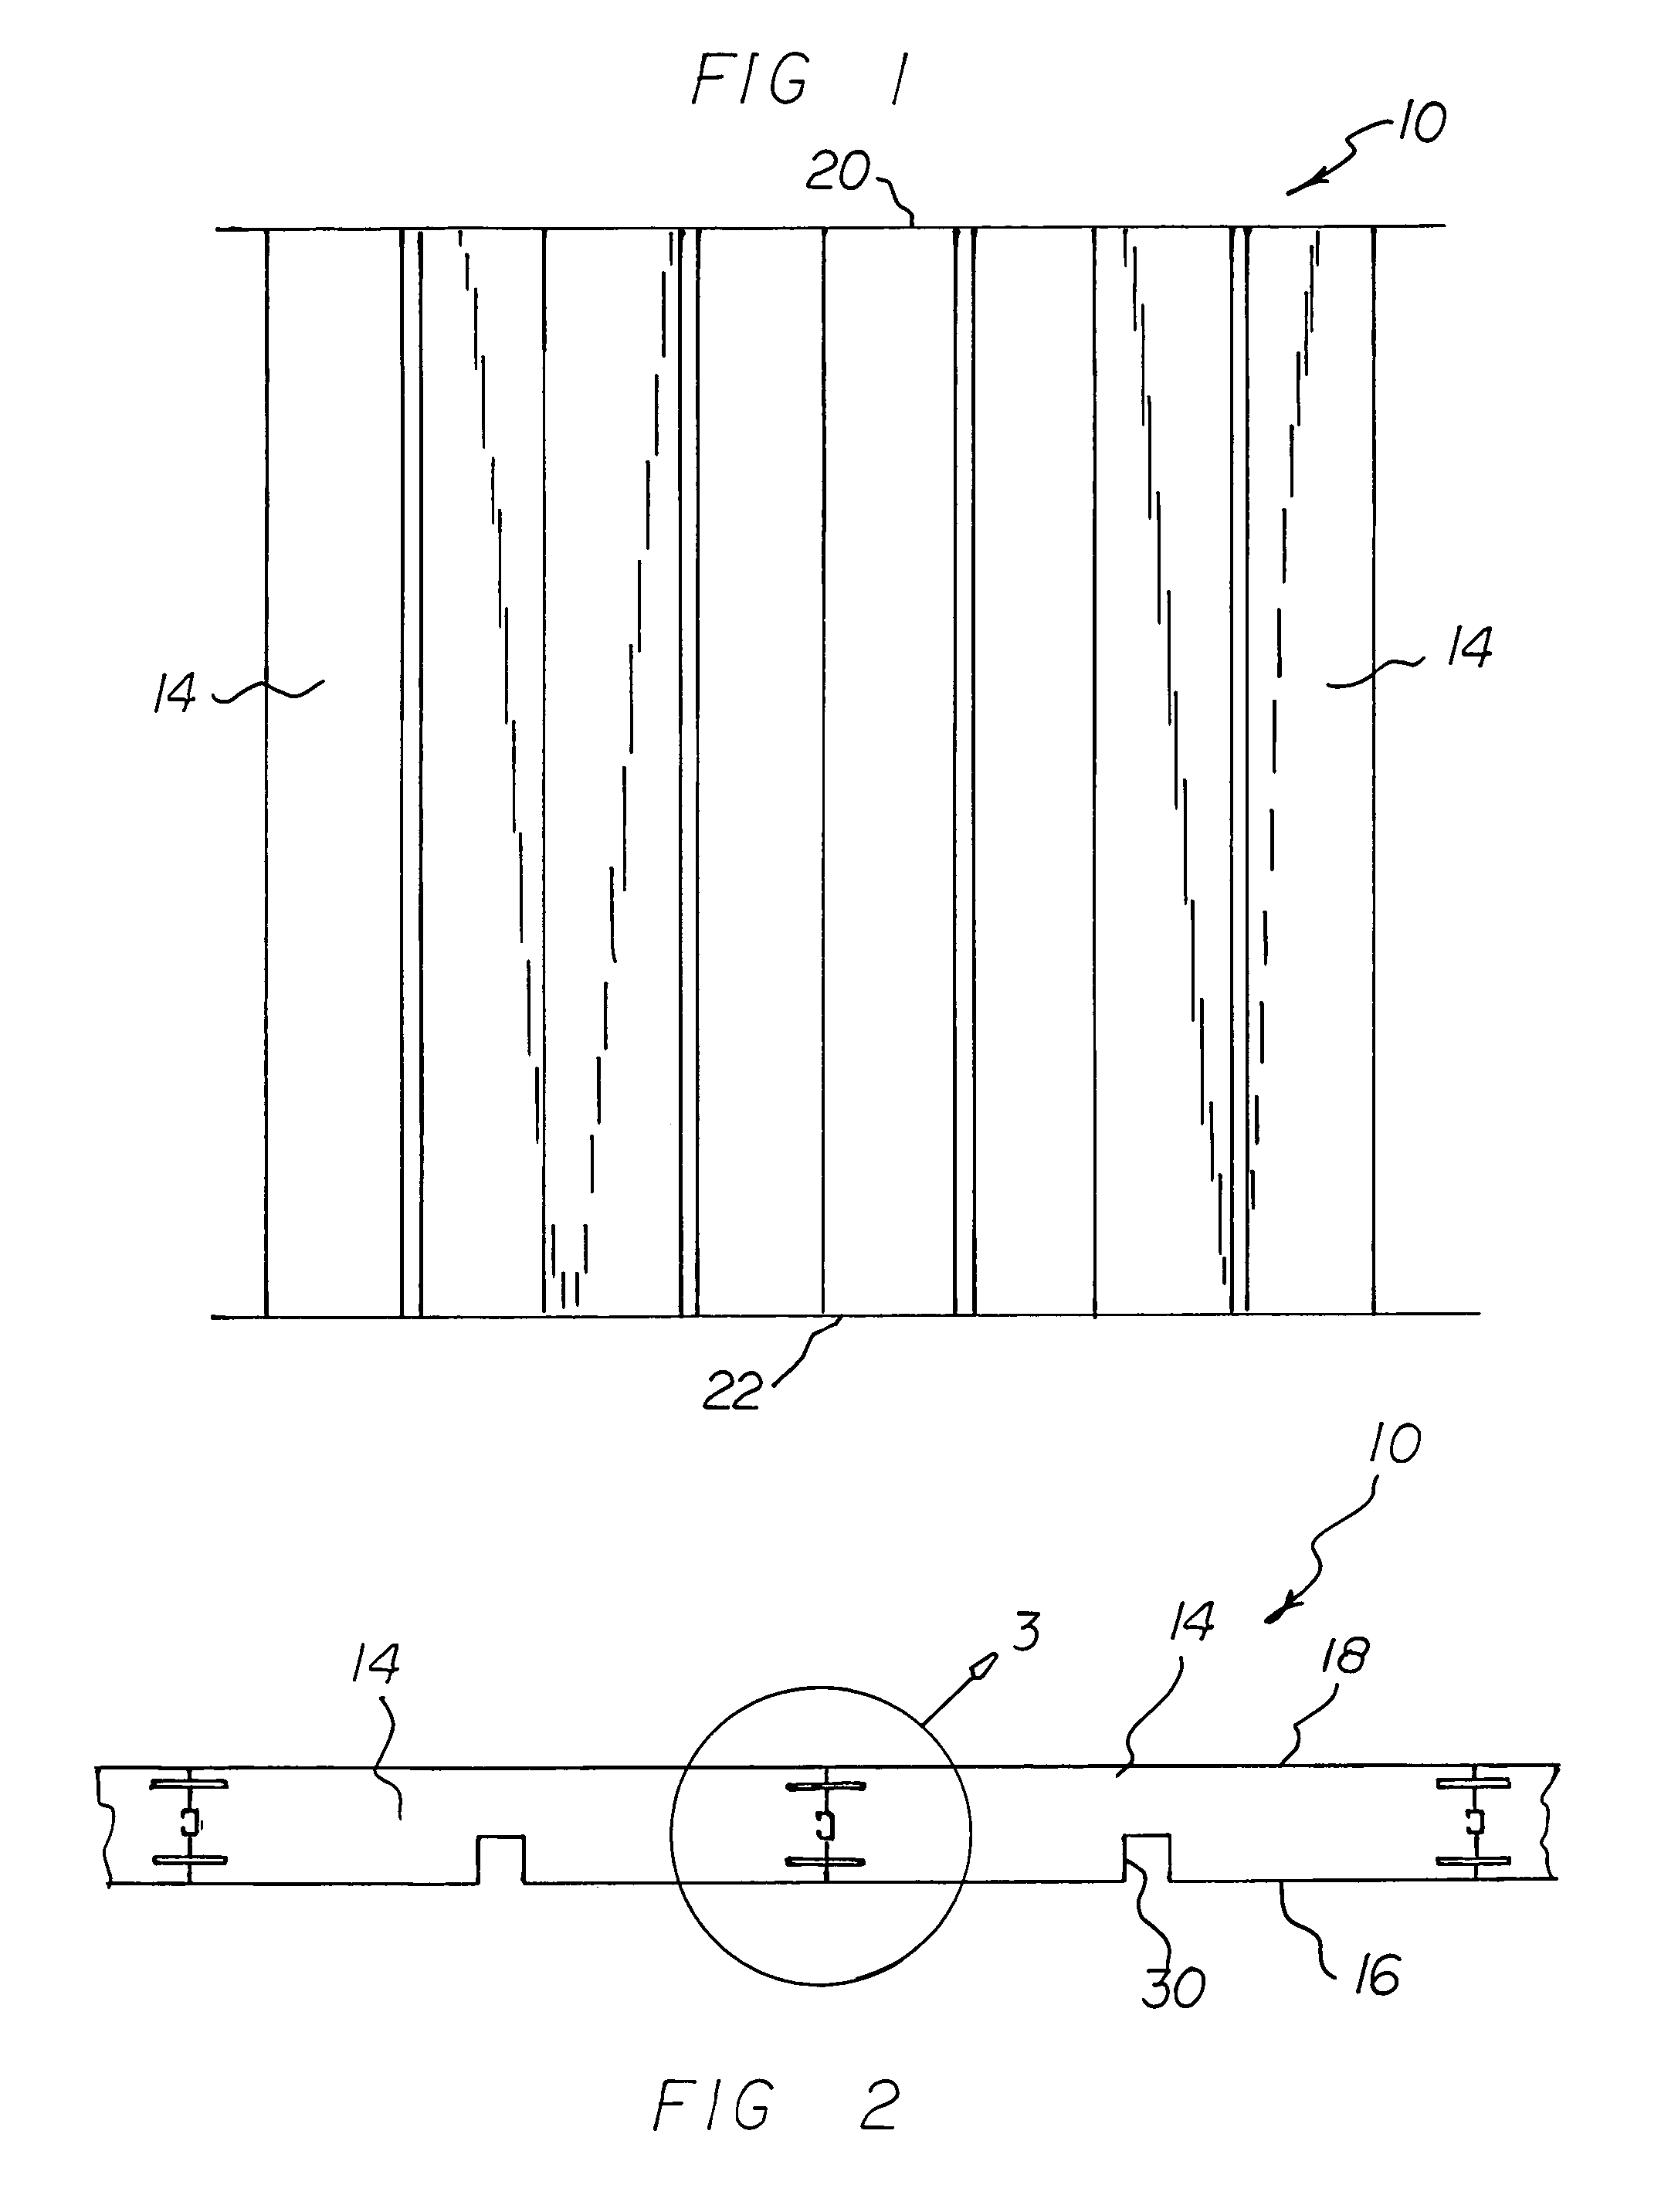 Metal-faced building panels having angled projections in longitudinal edge recesses for mating with locking ramps on flanges of concealed I-shaped connector